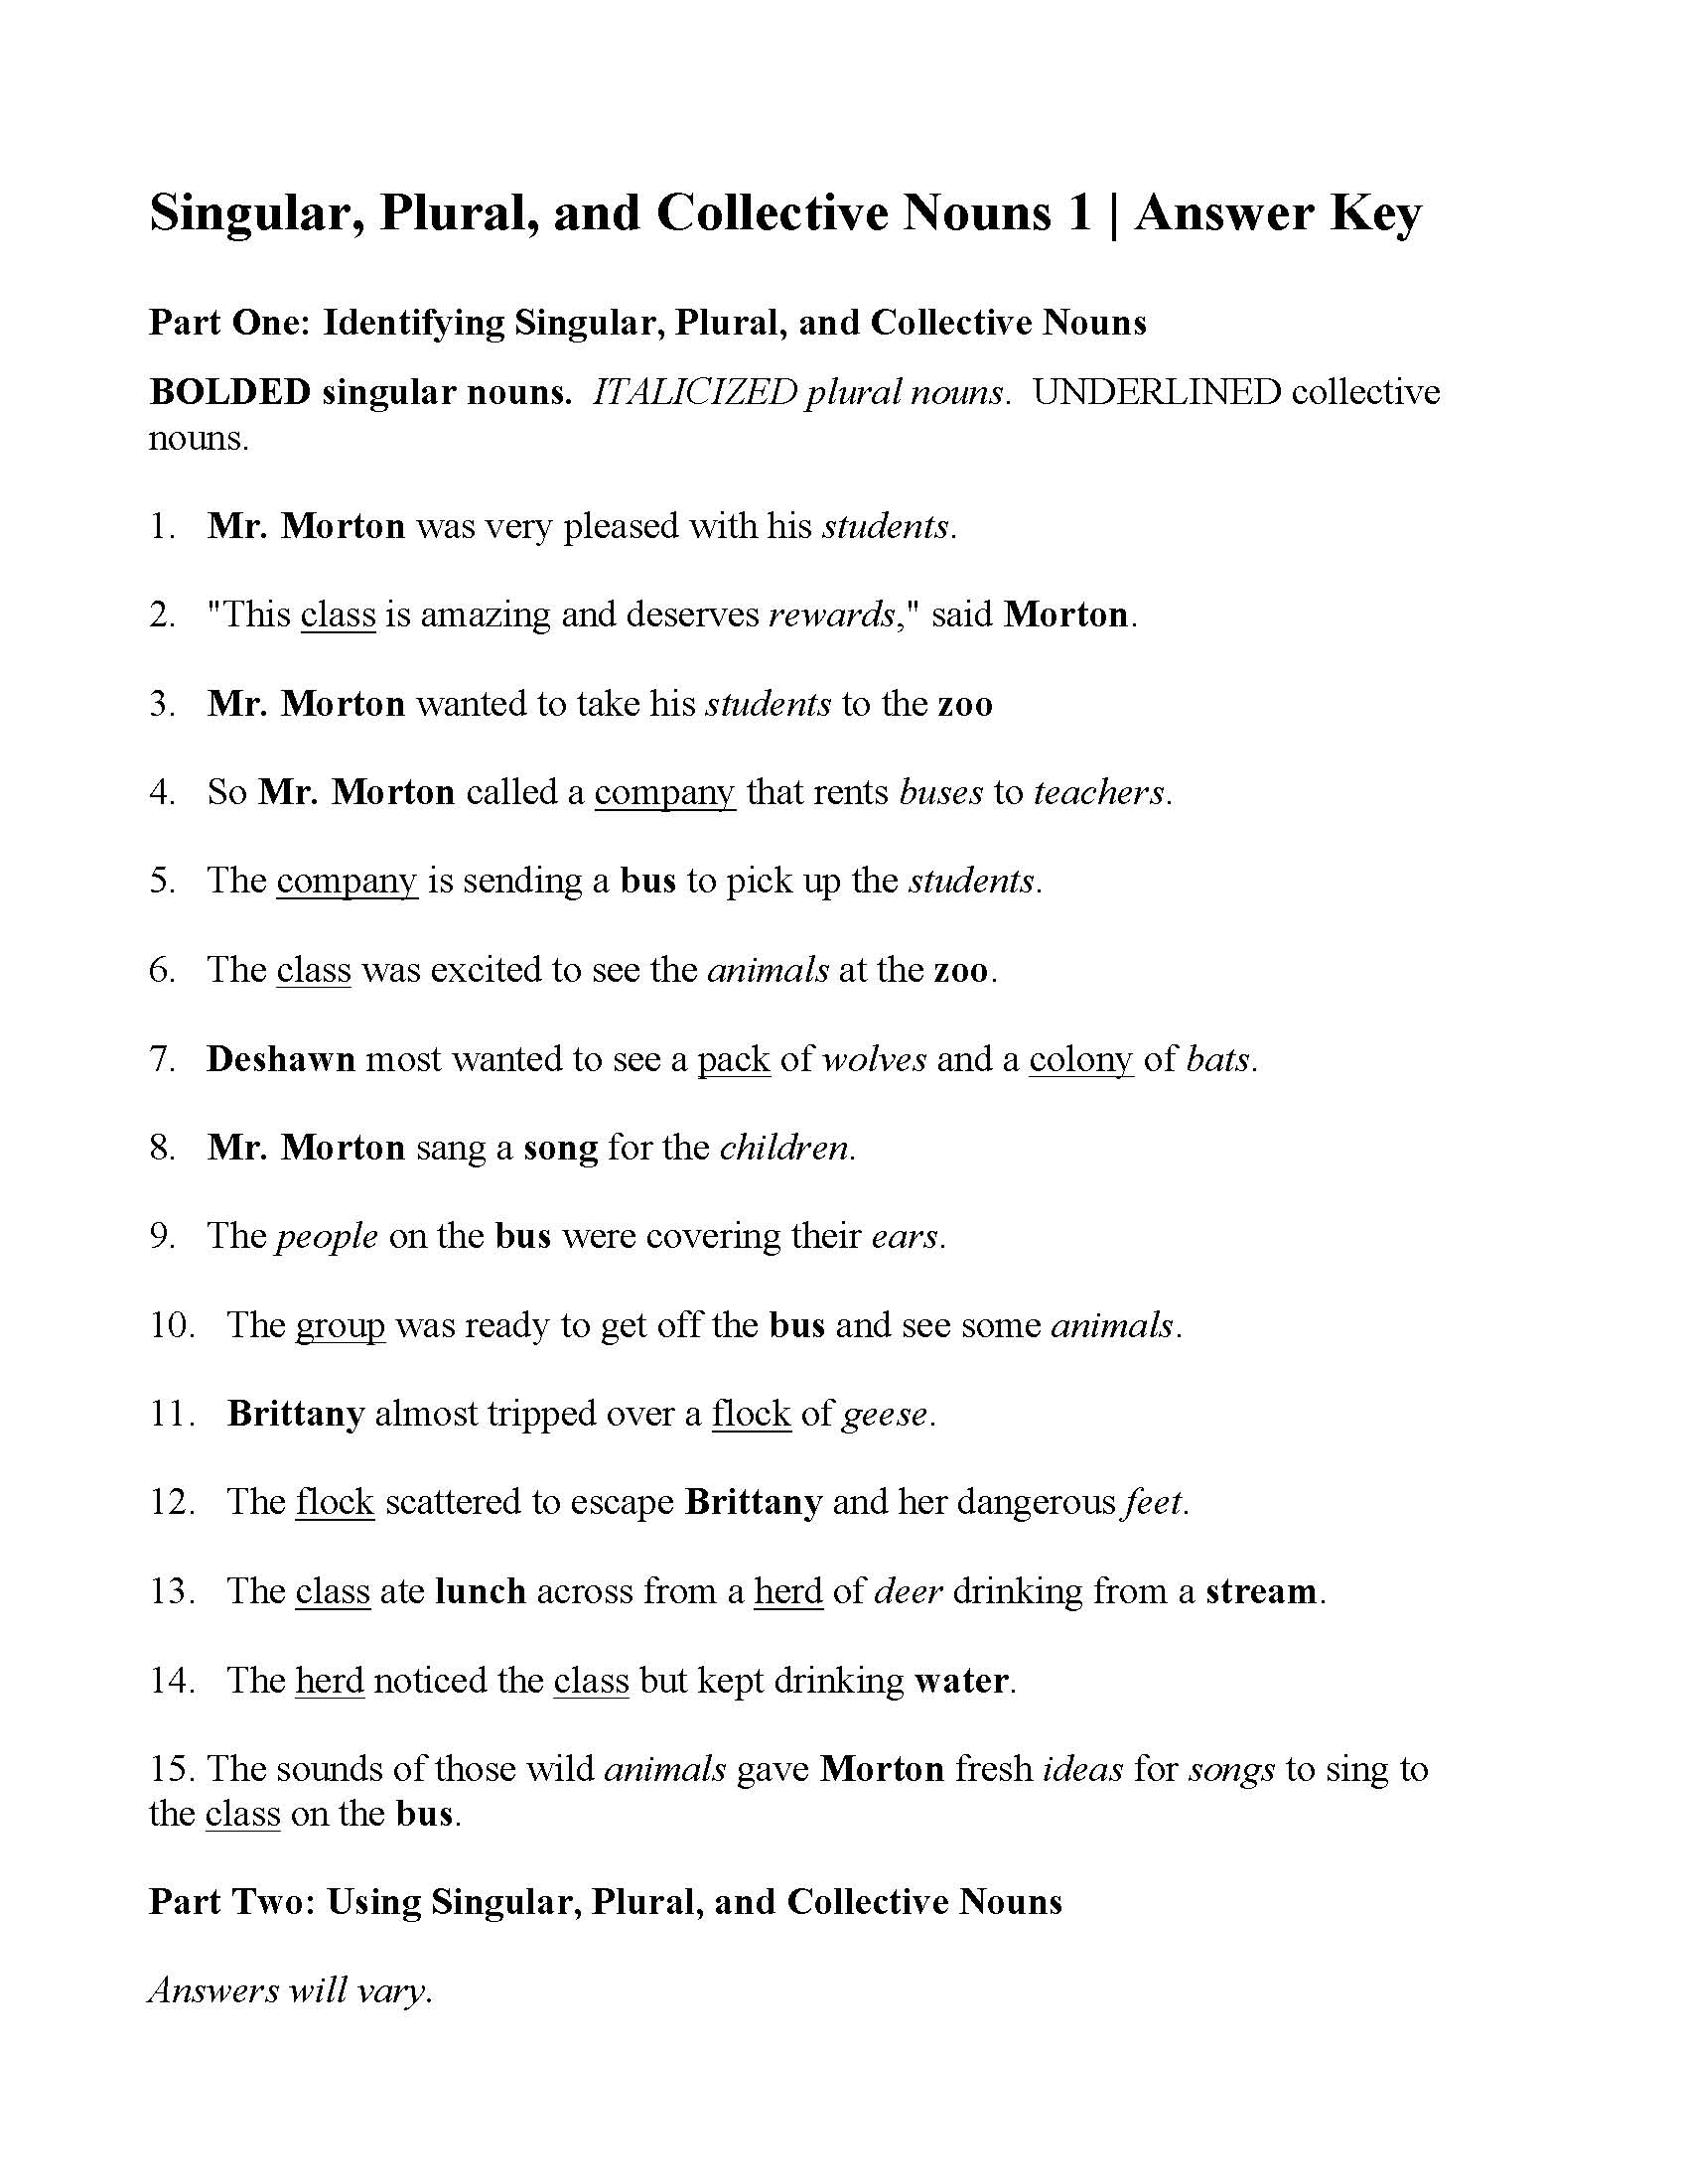 singular-plural-and-collective-nouns-worksheet-at-the-zoo-parts-of-speech-activity